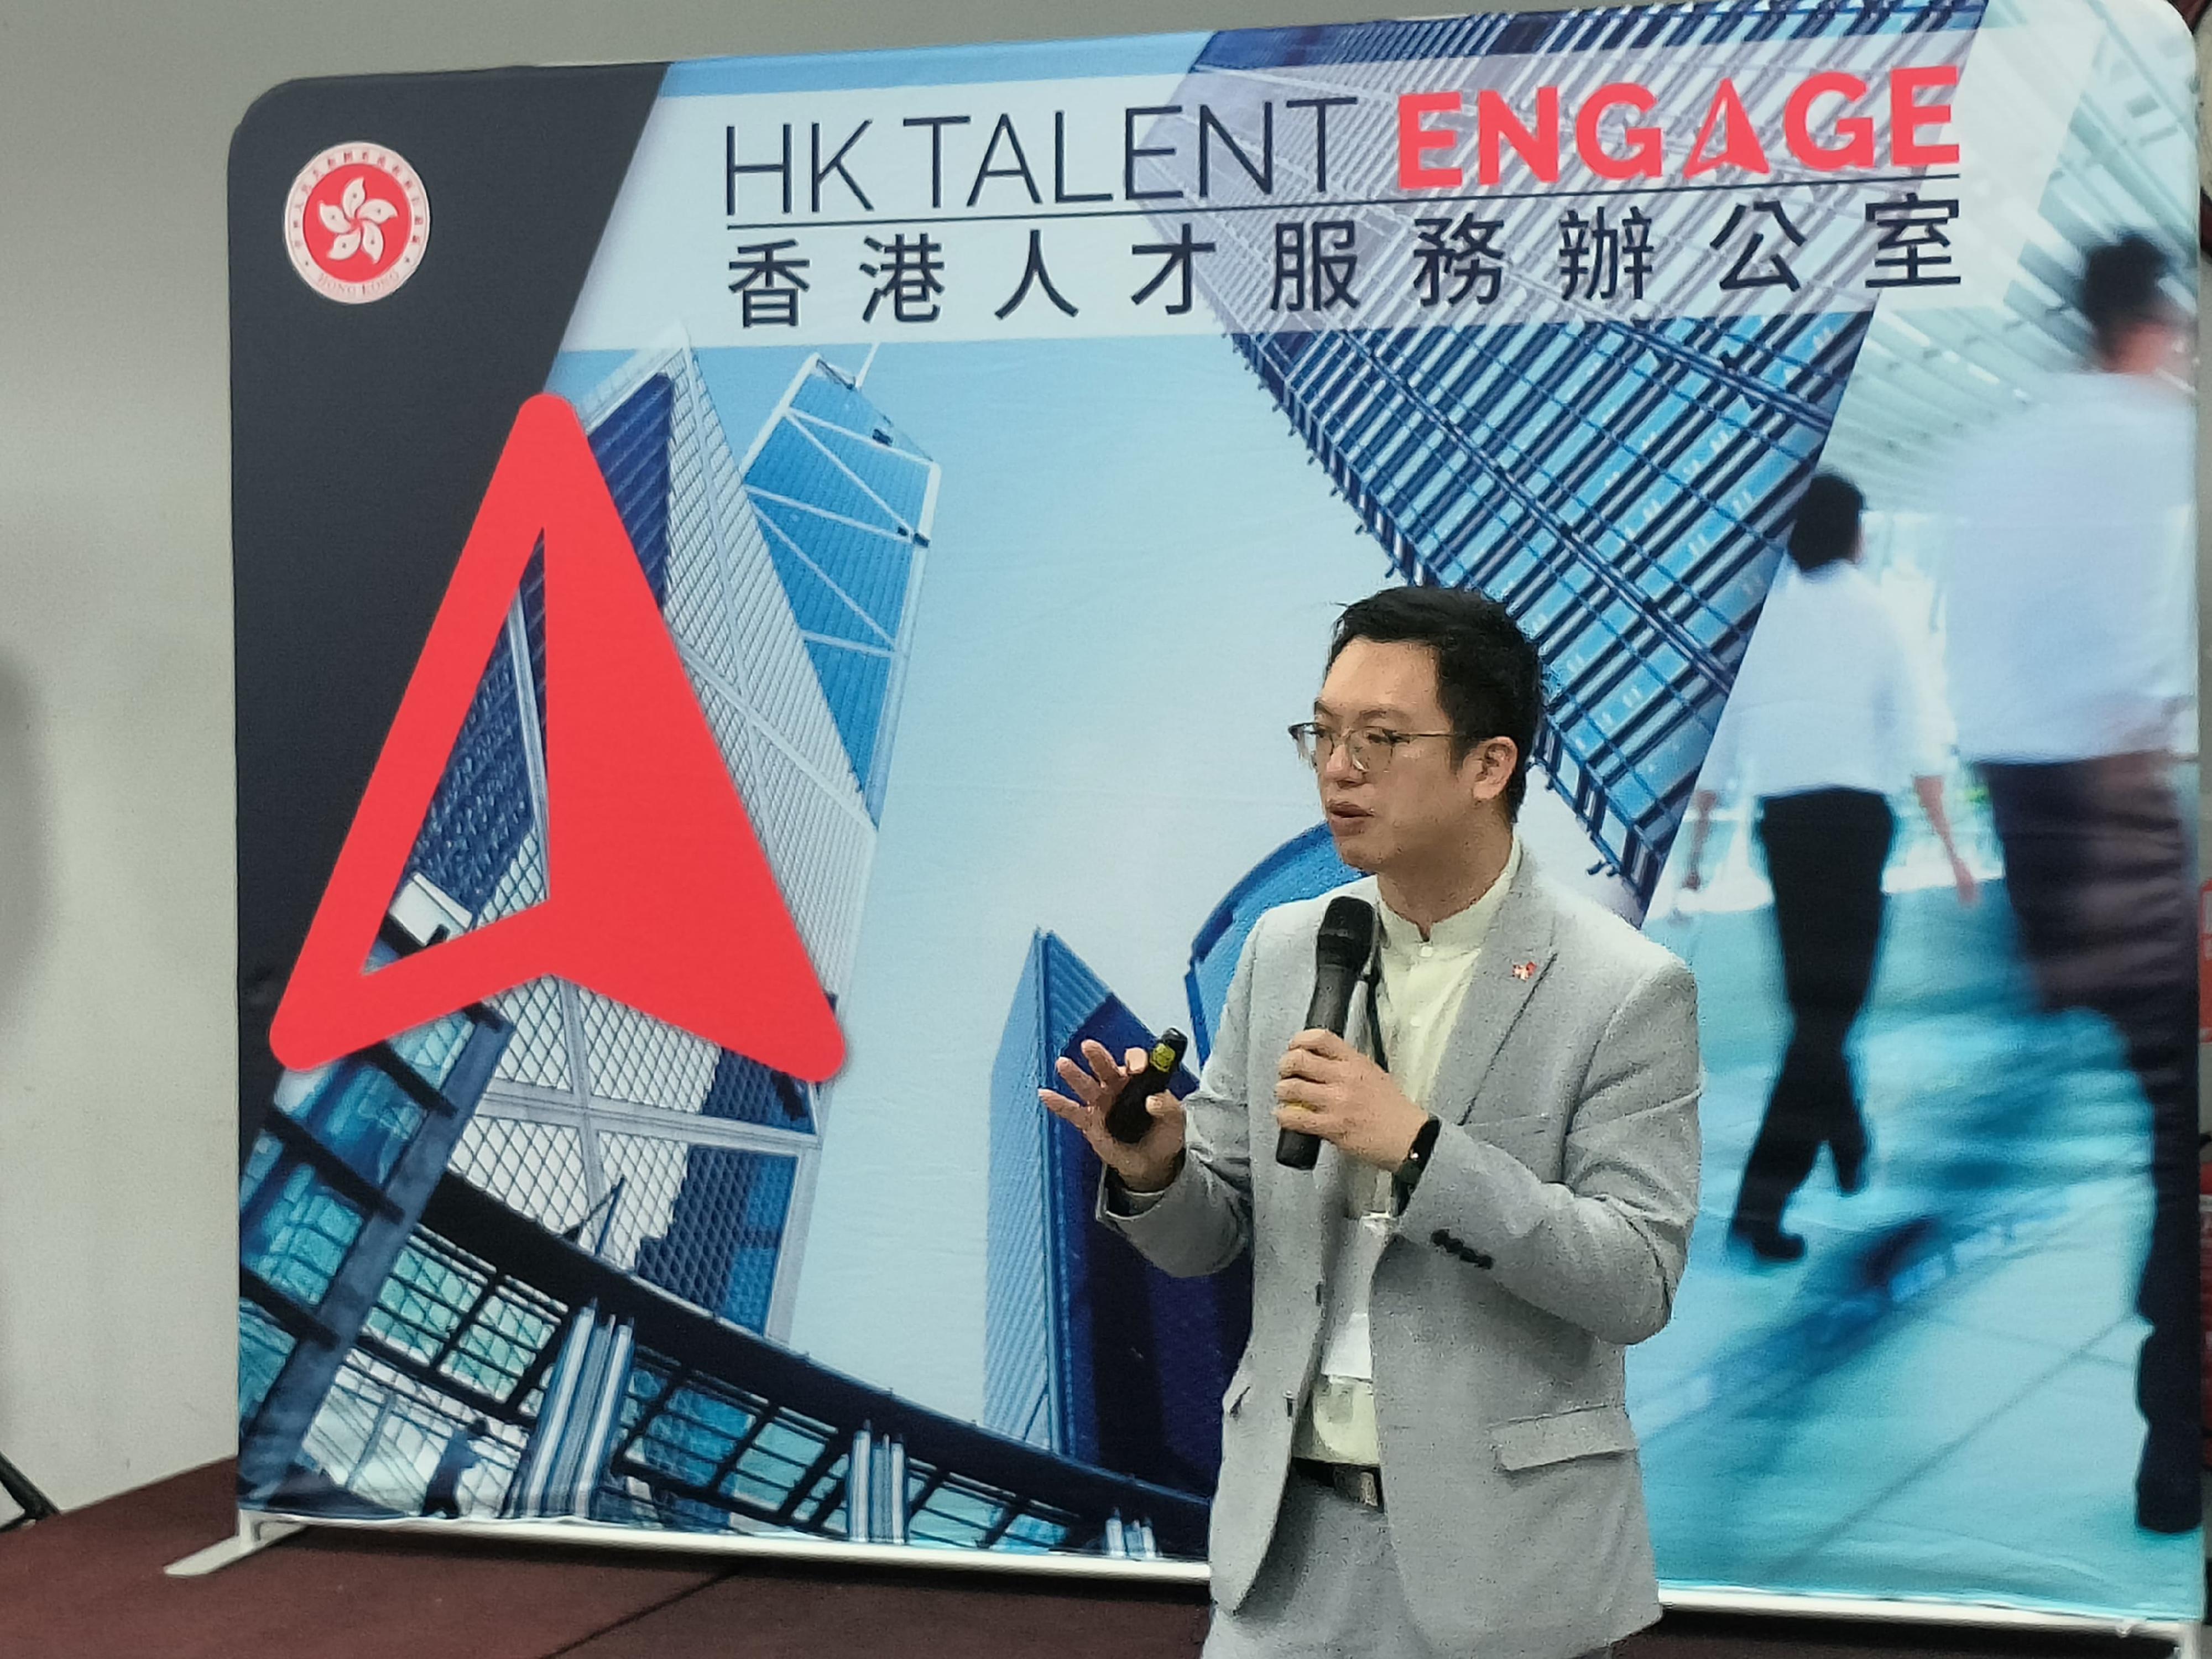 The Under Secretary for Labour and Welfare, Mr Ho Kai-ming, today (March 6) promoted Hong Kong's distinctive advantages of enjoying strong support of the motherland and being closely connected to the world in his appeal to talent to make the move to Hong Kong on his visit to Kuala Lumpur, Malaysia. Photo shows Mr Ho speaking at a recruitment talk hosted by Hong Kong Talent Engage to introduce to university students various talent admission schemes, urging them to explore opportunities and develop their careers in Hong Kong.